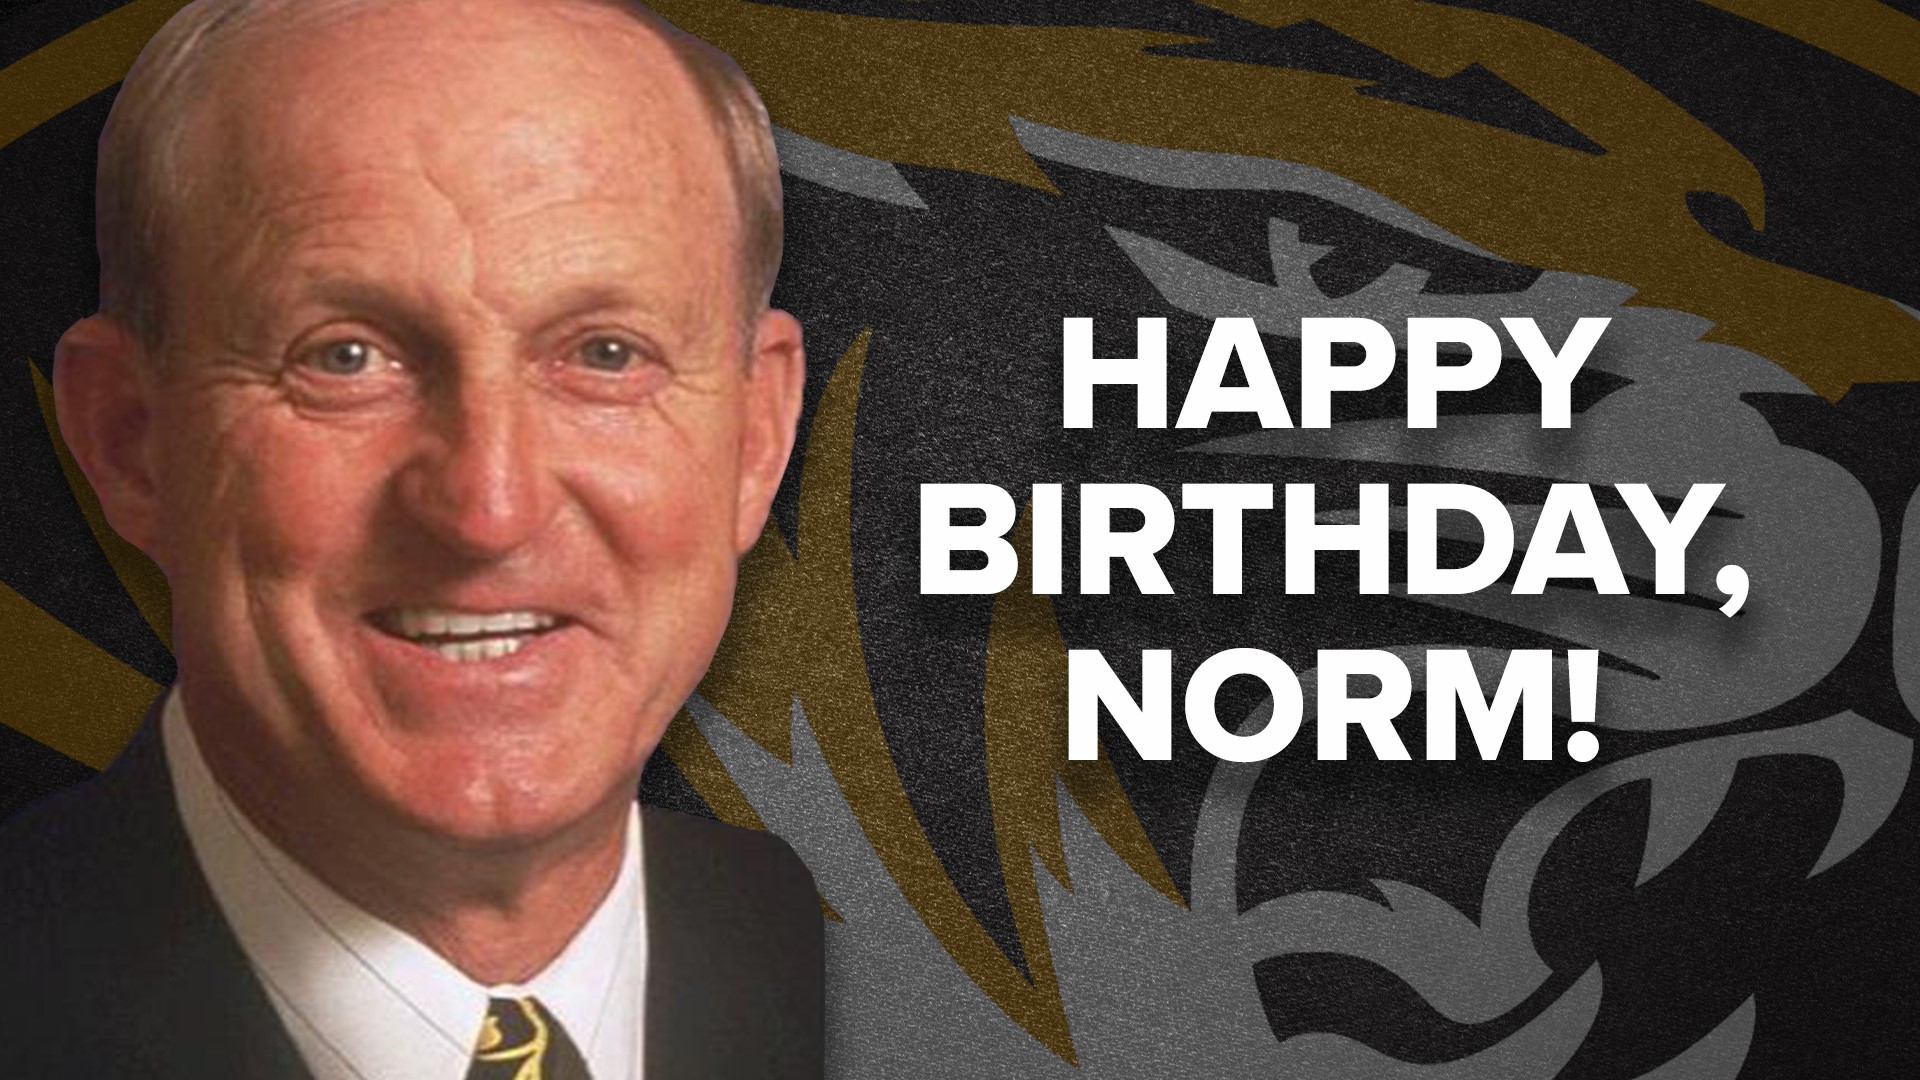 "Stormin Norman" was one of the most tenacious coaches in the history of college hoops